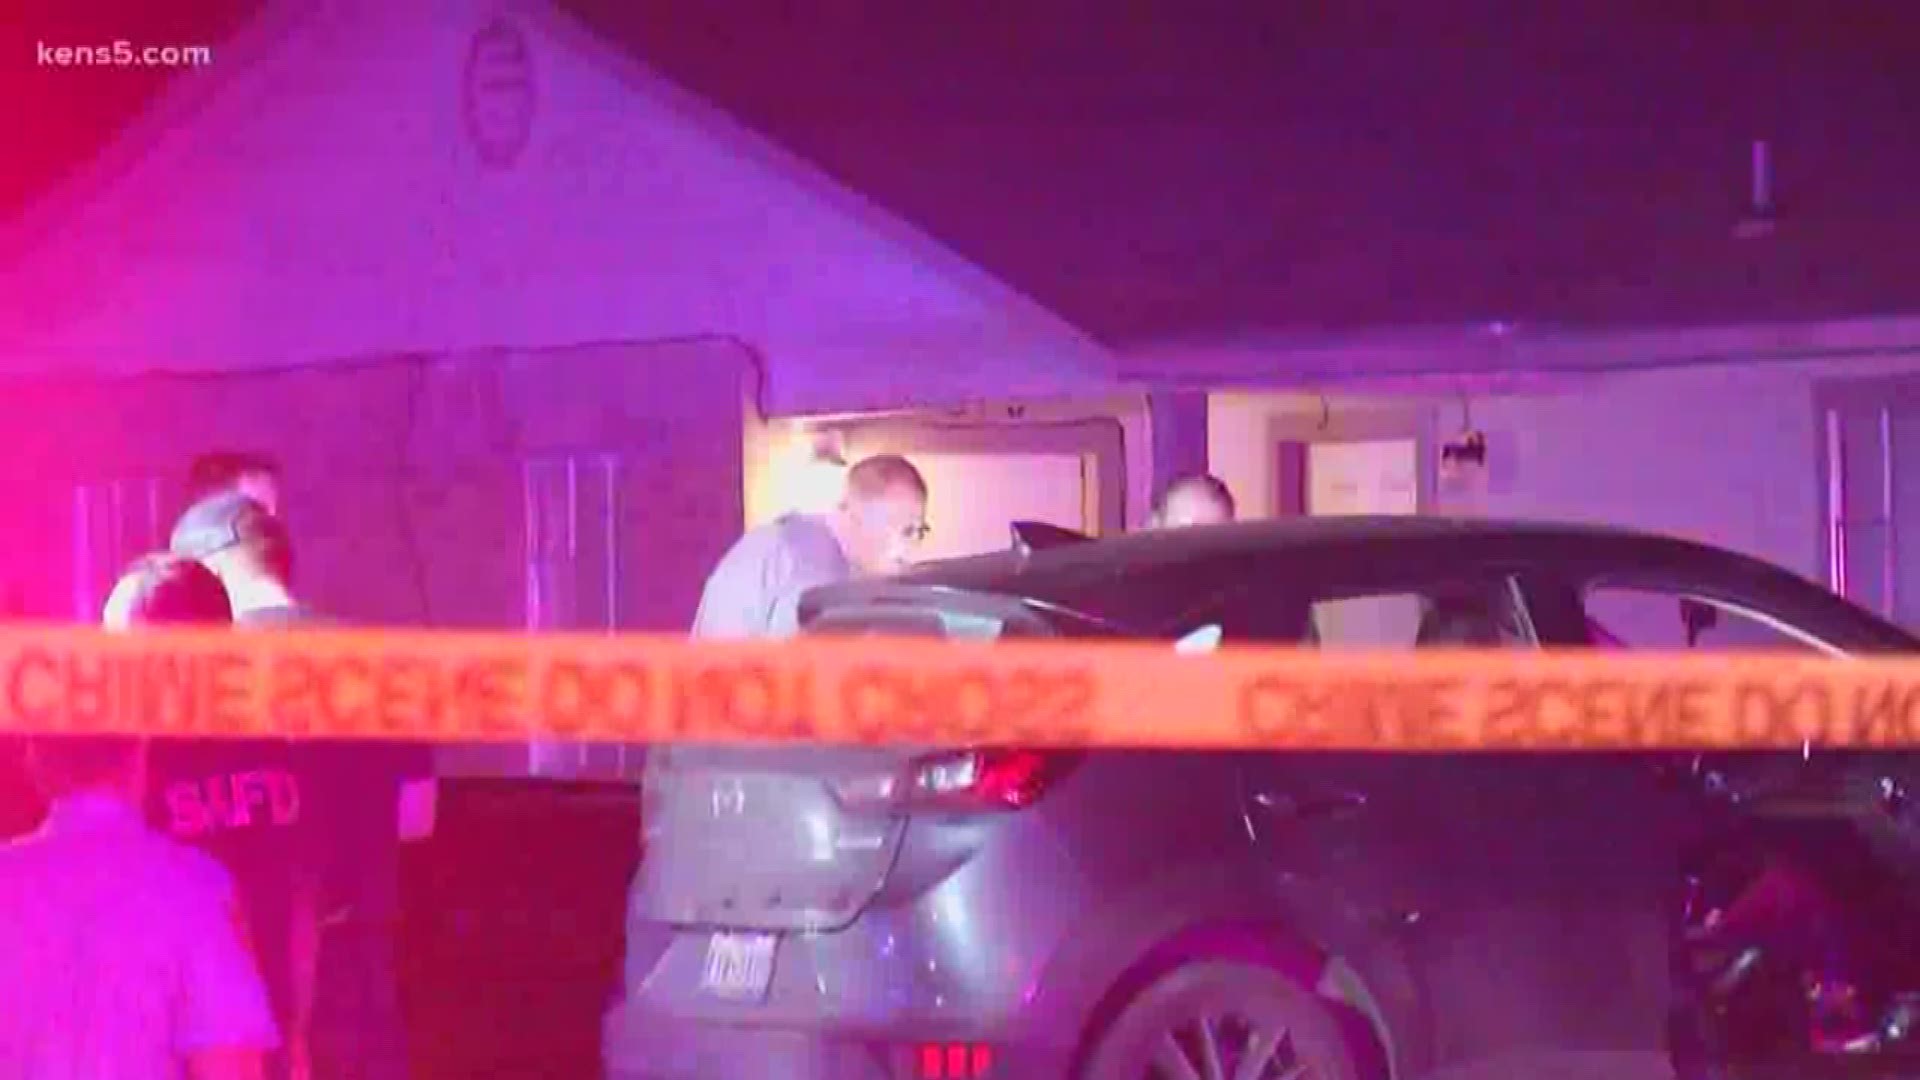 A woman was found shot to death in a car on a yard at a home north of downtown late Wednesday night.